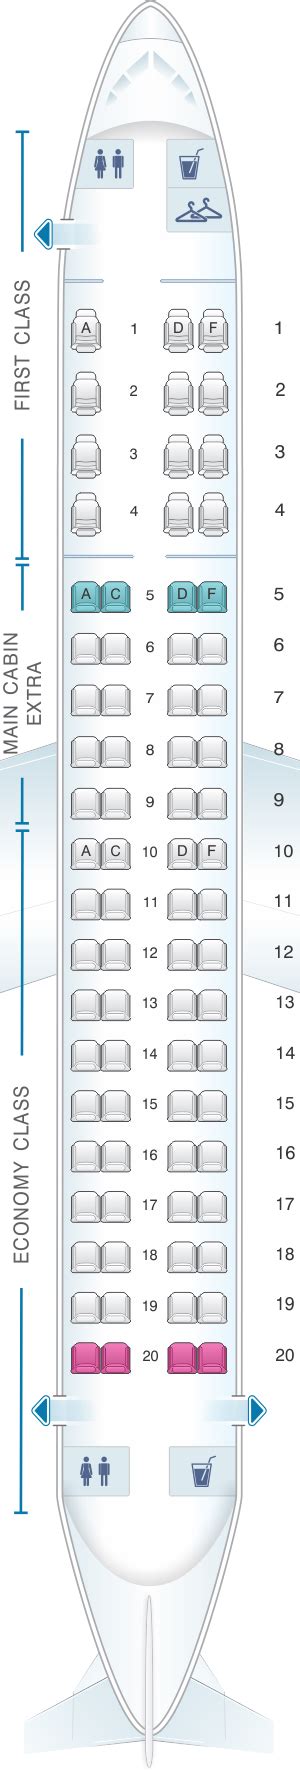 American airlines embraer 175 seat map. The American Airlines Airbus A321 (321) 187 passenger version is primarily used on US domestic routes. This aircraft features a First Class cabin with 16 recliner-style seats in a 2-2. The Main Cabin features 171 standard Economy Class-style seats arranged in a 3-3 configuration. 